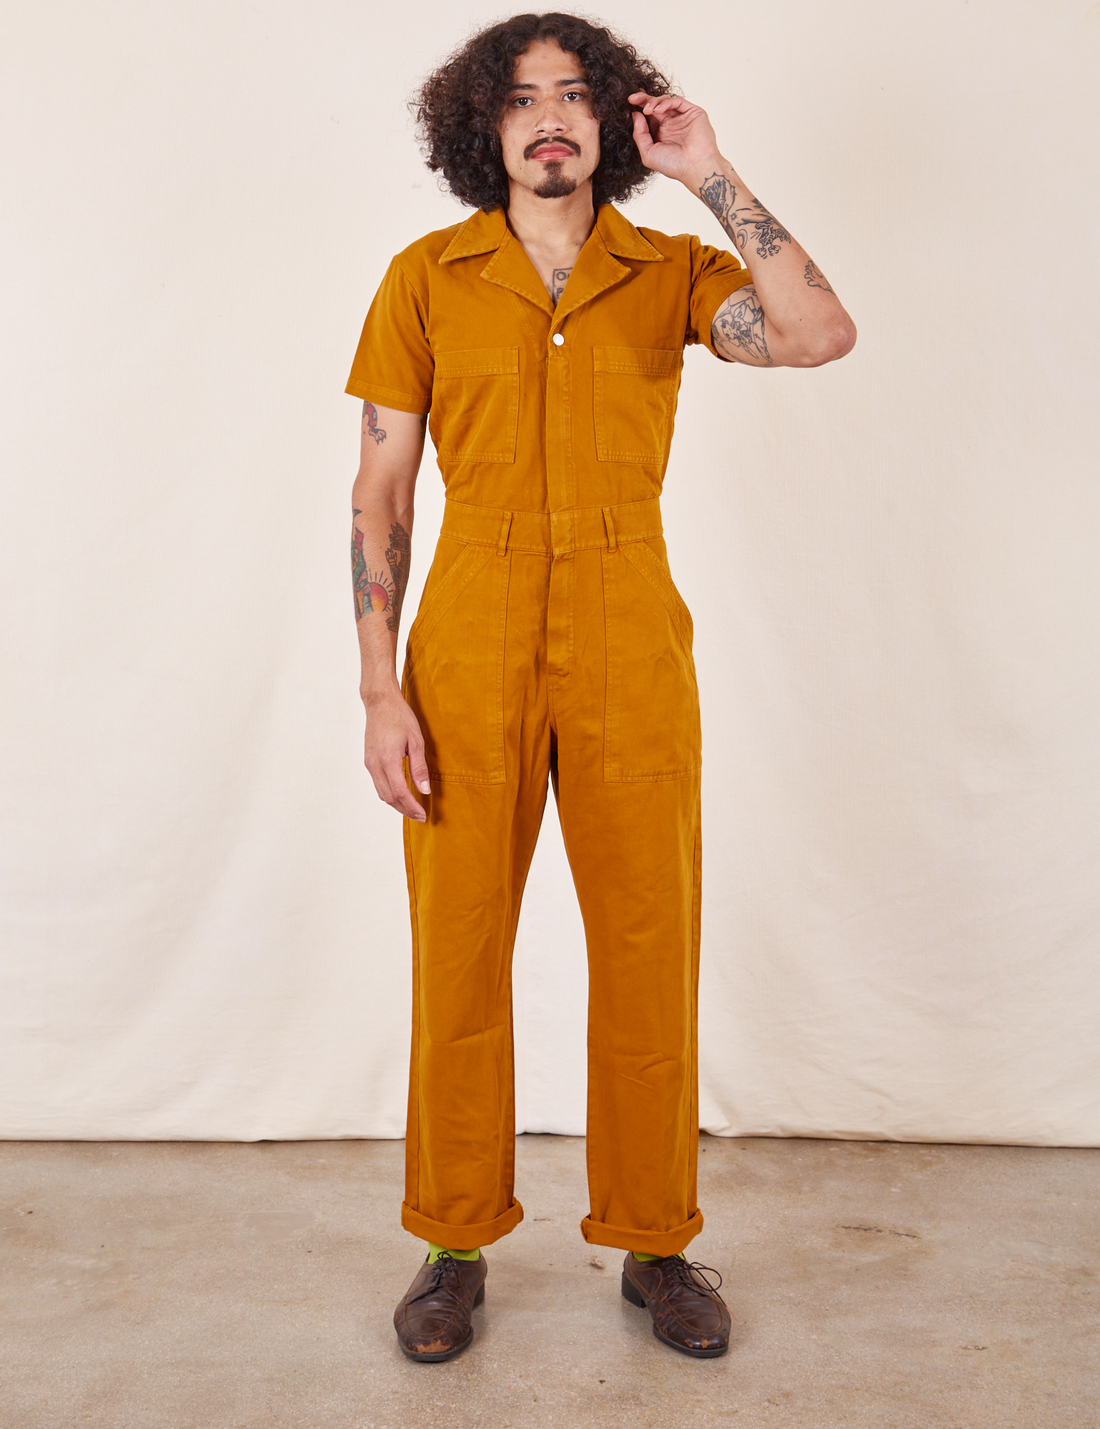 Jesse is 5'7" and wearing S Short Sleeve Jumpsuit in Spicy Mustard